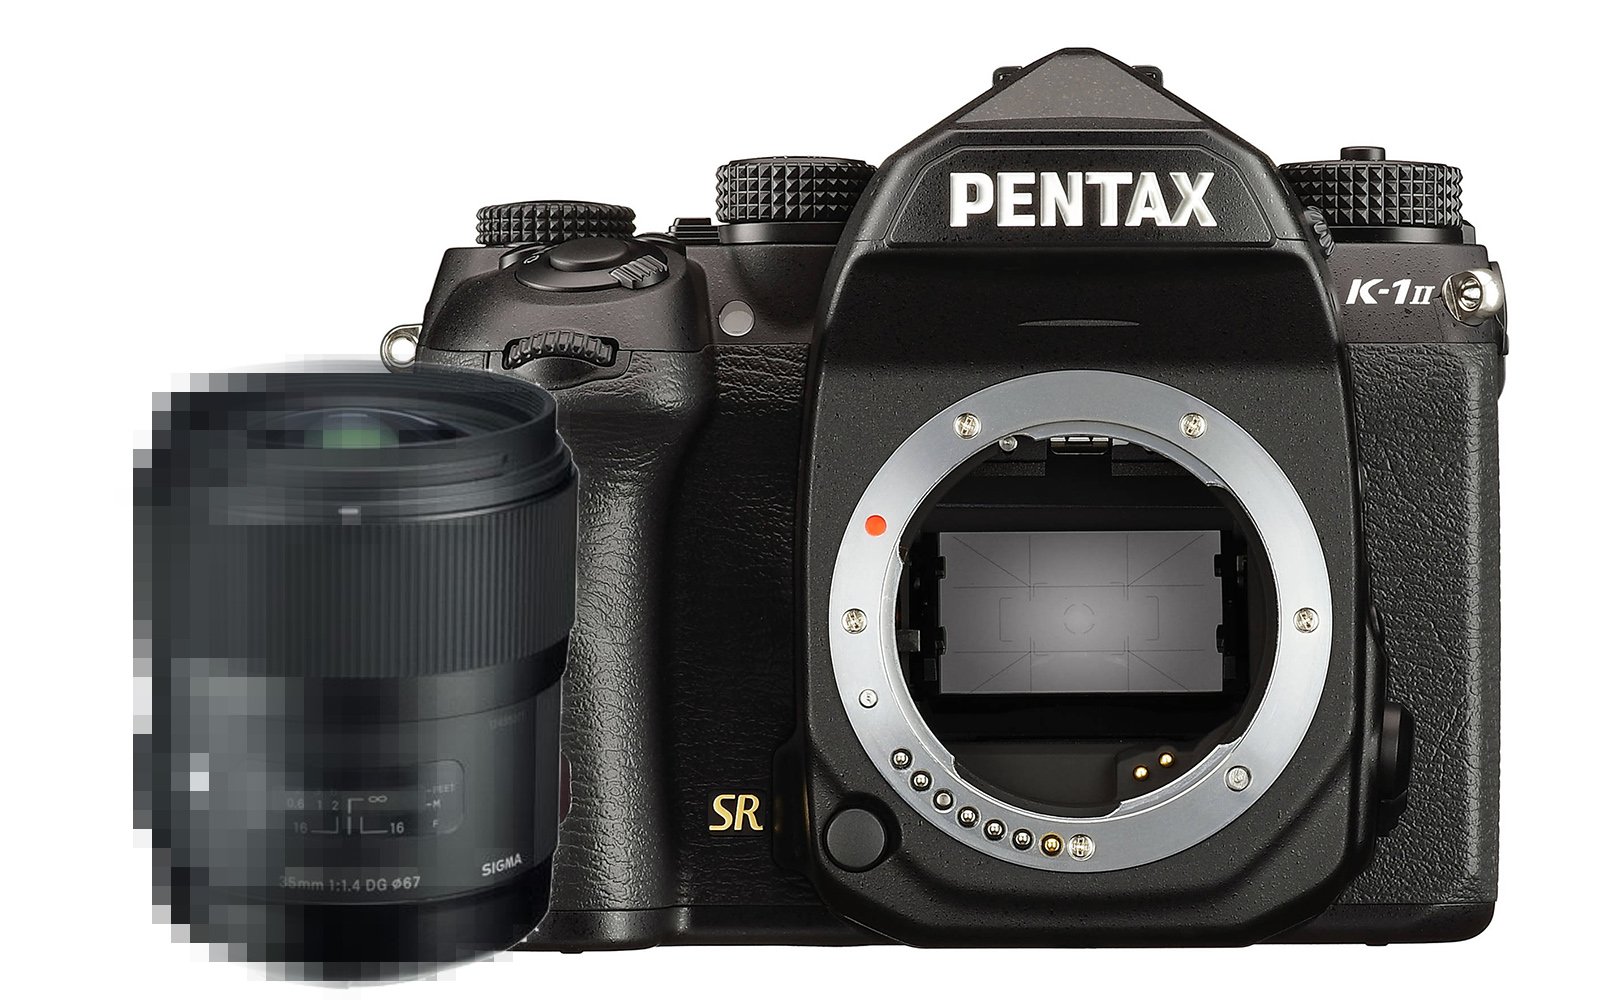 Sigma is Giving Up on the Pentax K-Mount to Focus on Mirrorless Lenses